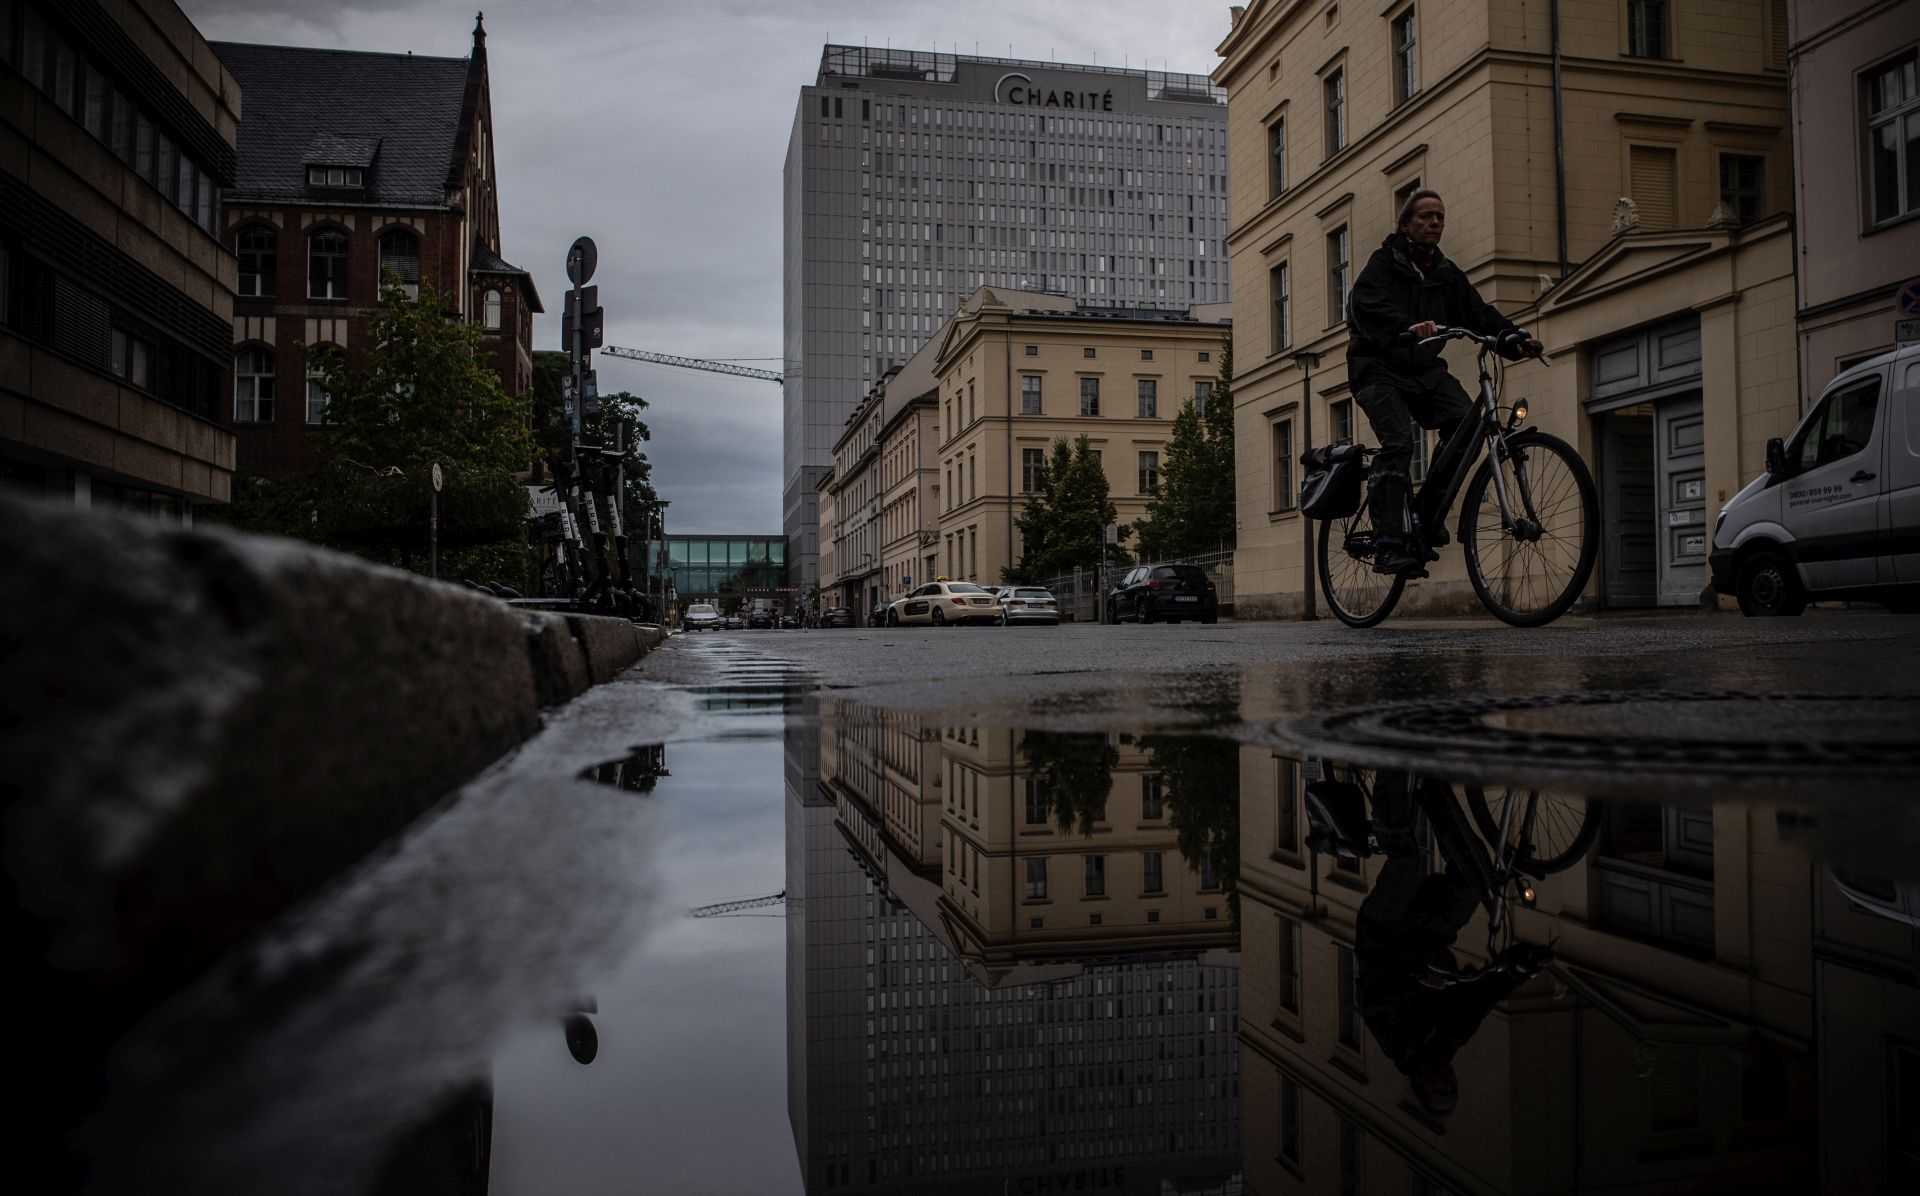 epa08642343 Charite hospital is reflected in a puddle in Berlin, Germany, 02 September 2020. The German government on 02 September 2020 said 'the unequivocal proof' that Navalny was poisoned with a nerve agent from the Novichok group was established. Navalny is treated at the Charite hospital in Berlin since 22 August 2020. He was first placed in an hospital in Omsk, Russia, after he felt bad on board of a plane on his way from Tomsk to Moscow. The flight was interrupted and after landing in Omsk Navalny was delivered to hospital with a suspicion on a toxic poisoning.  EPA/FILIP SINGER